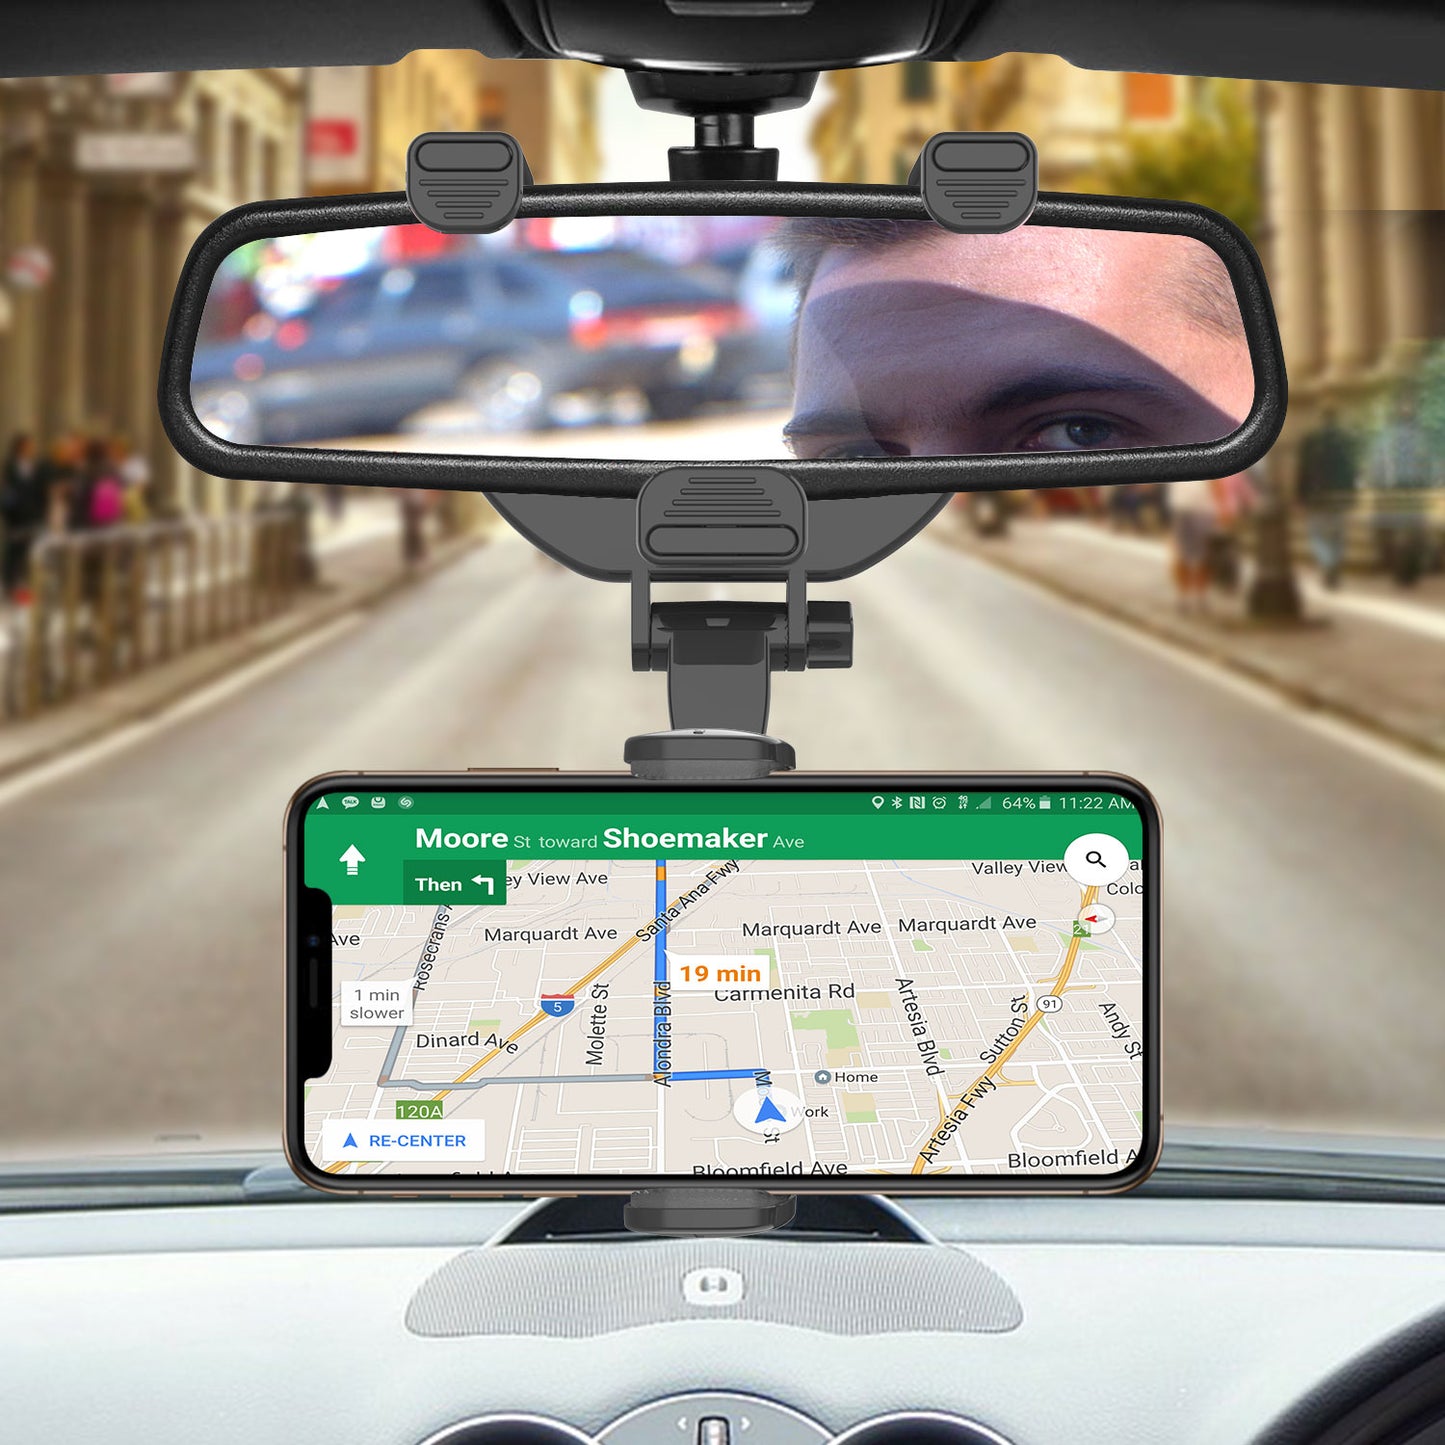 Car Rear-view Mirror Mount Phone Holder, 360 Degree Rotating, Adjustable Brackets Compatible for iPhones Galaxy Z Fold, Z Flip, Google Pixel, Moto